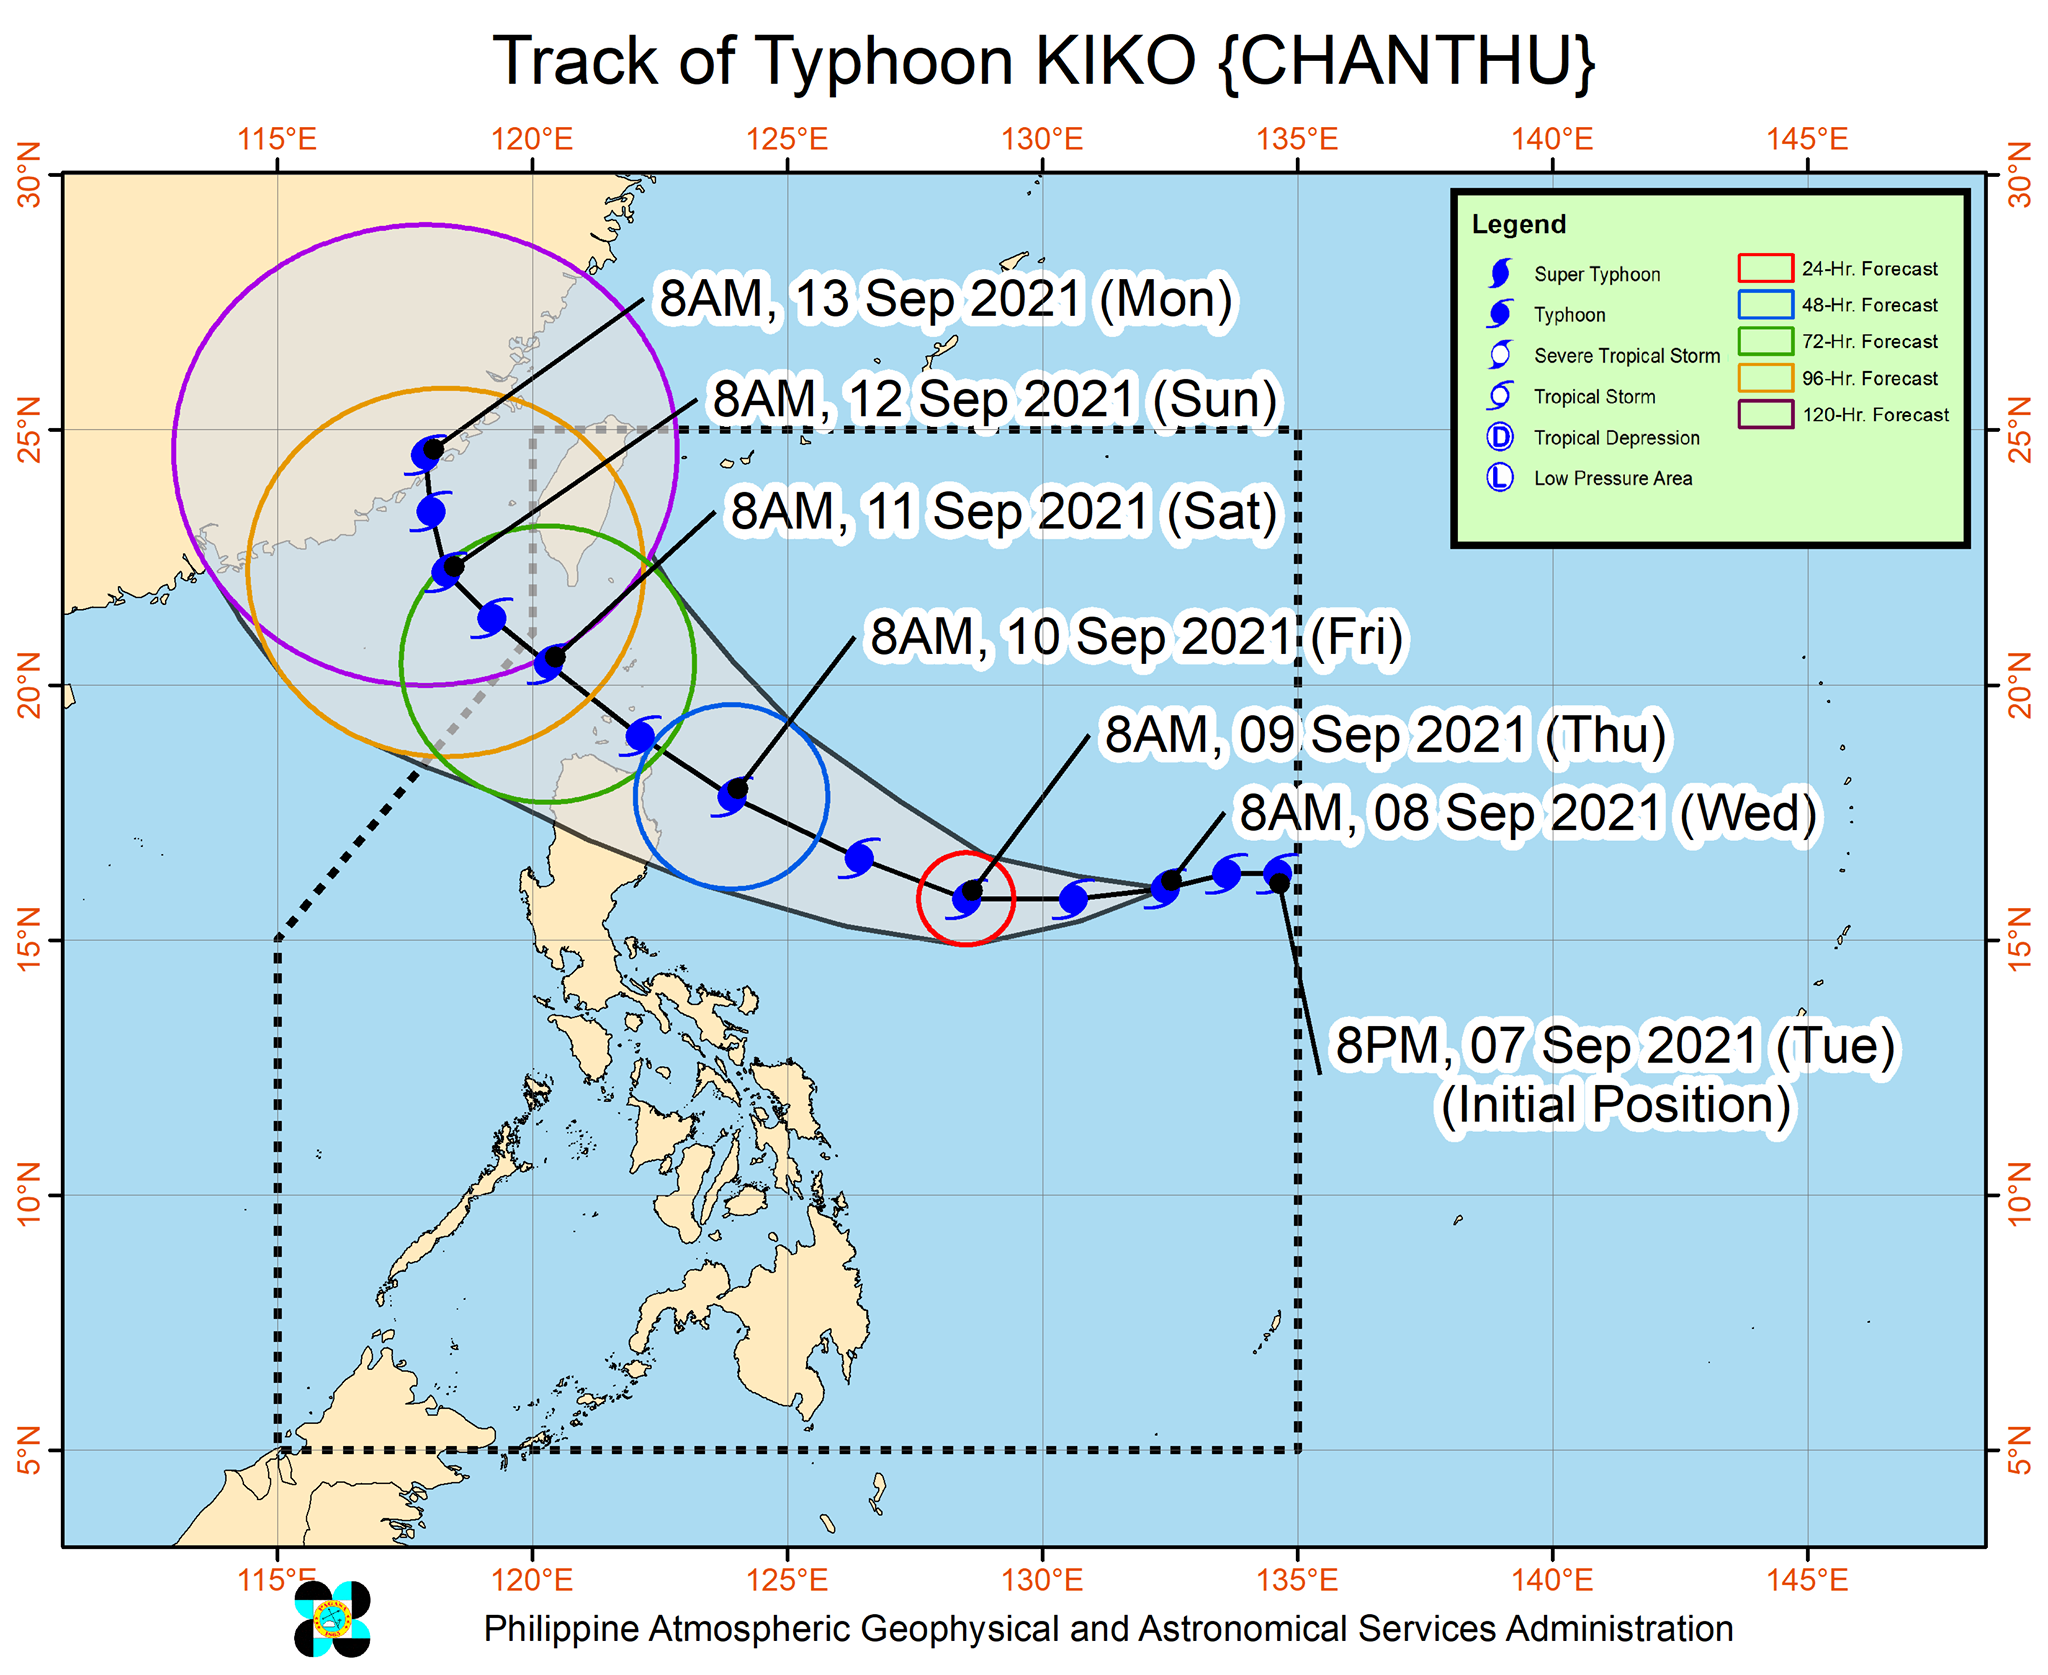 Track of Typhoon KIKO [CHANTHU]. (Photo / Provided by the Philippine Atmospheric Geophysical and Astronomical Services Administration PAGASA)